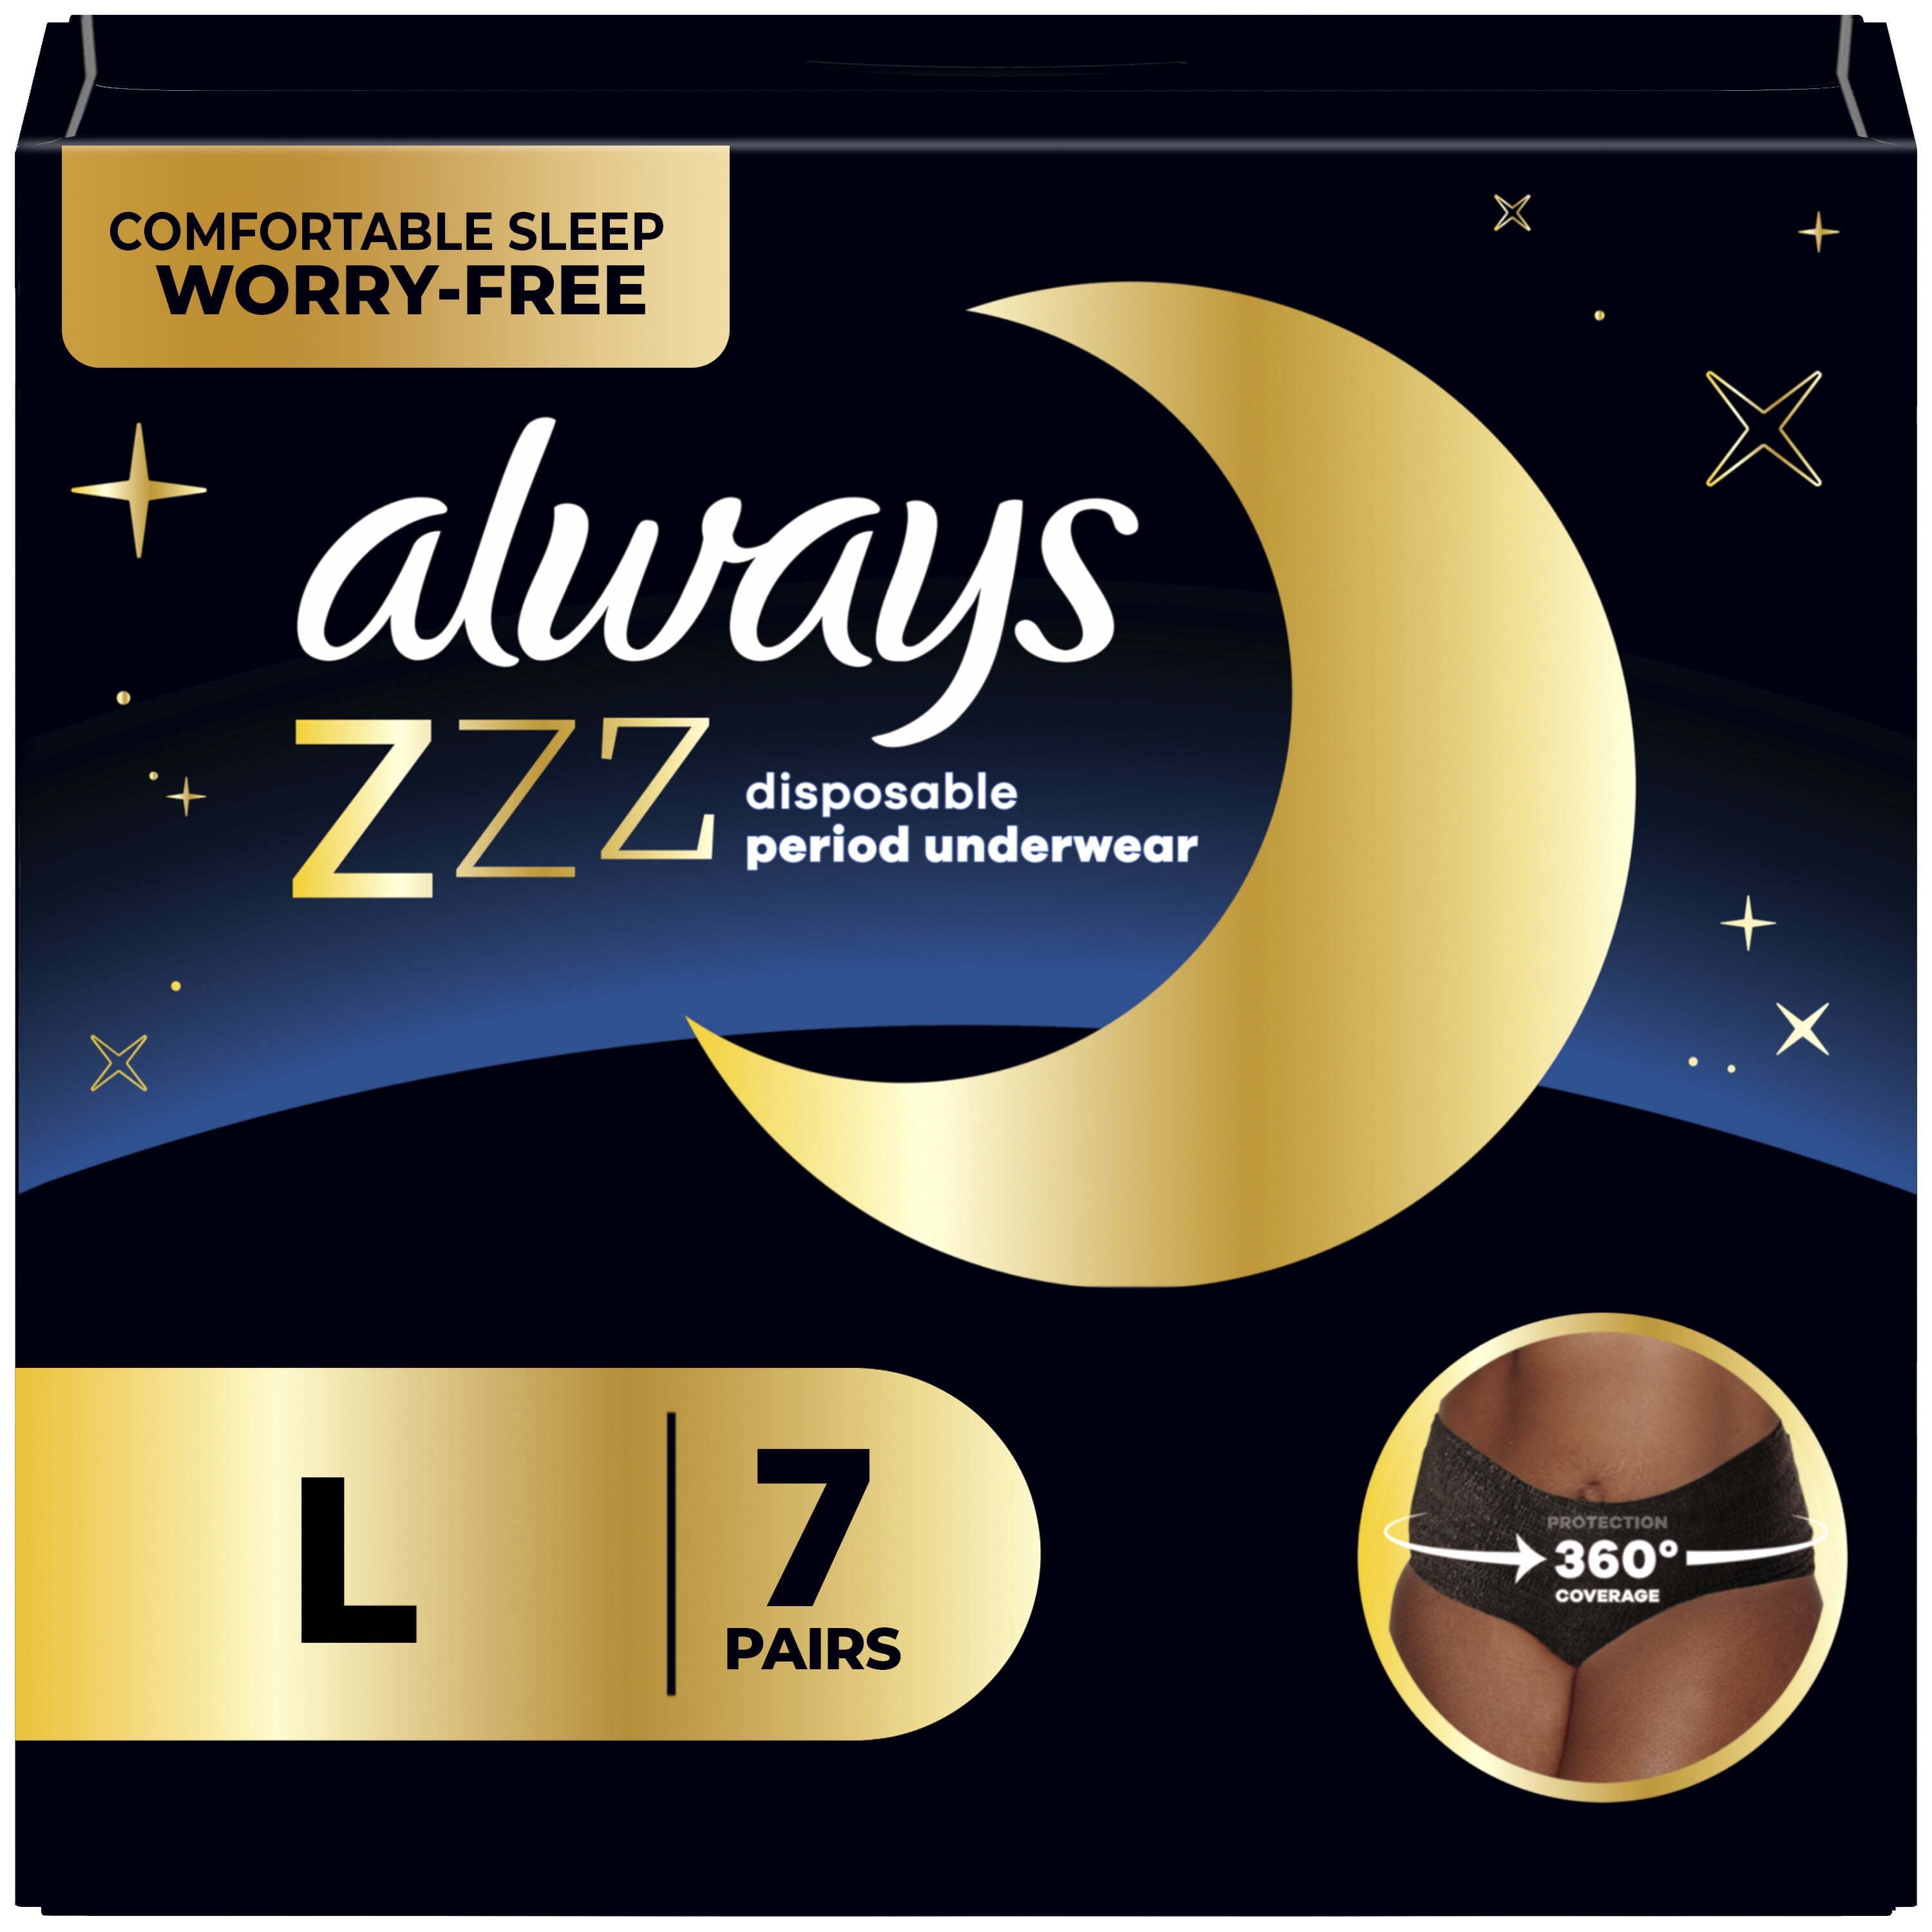 Always Zzzs Overnight Disposable Period Underwear For Women, Size  Small/Medium, Black Period Panties, Leakproof, 7 Count x 2 Packs (14 Count  total) 